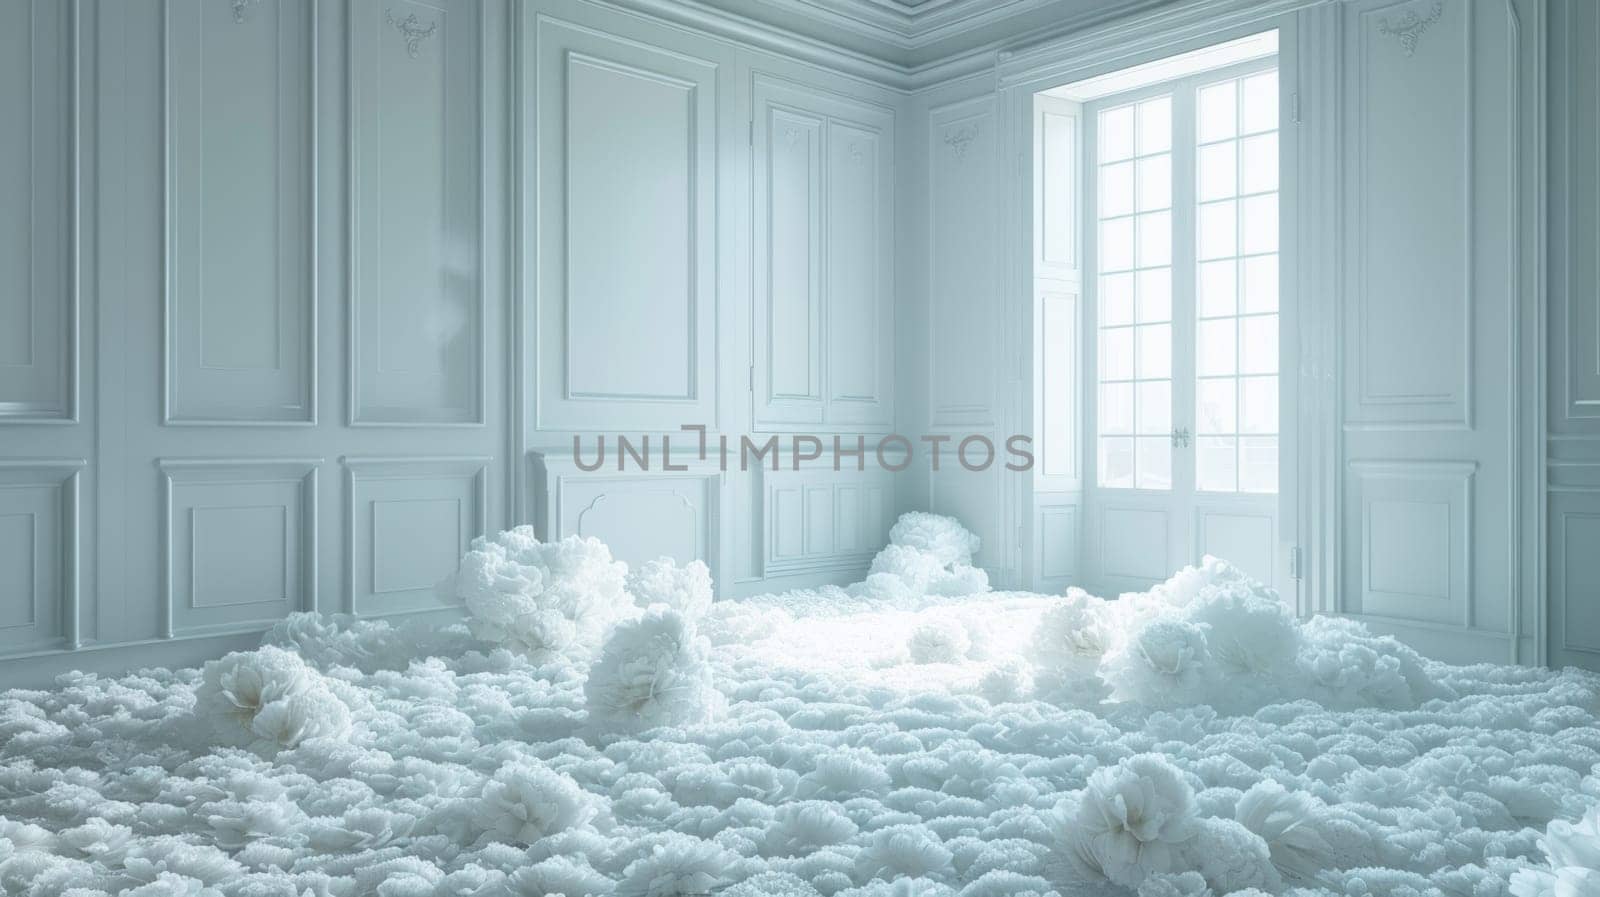 A room filled with ethereal white foam covering the floor, creating a dreamlike atmosphere by but_photo